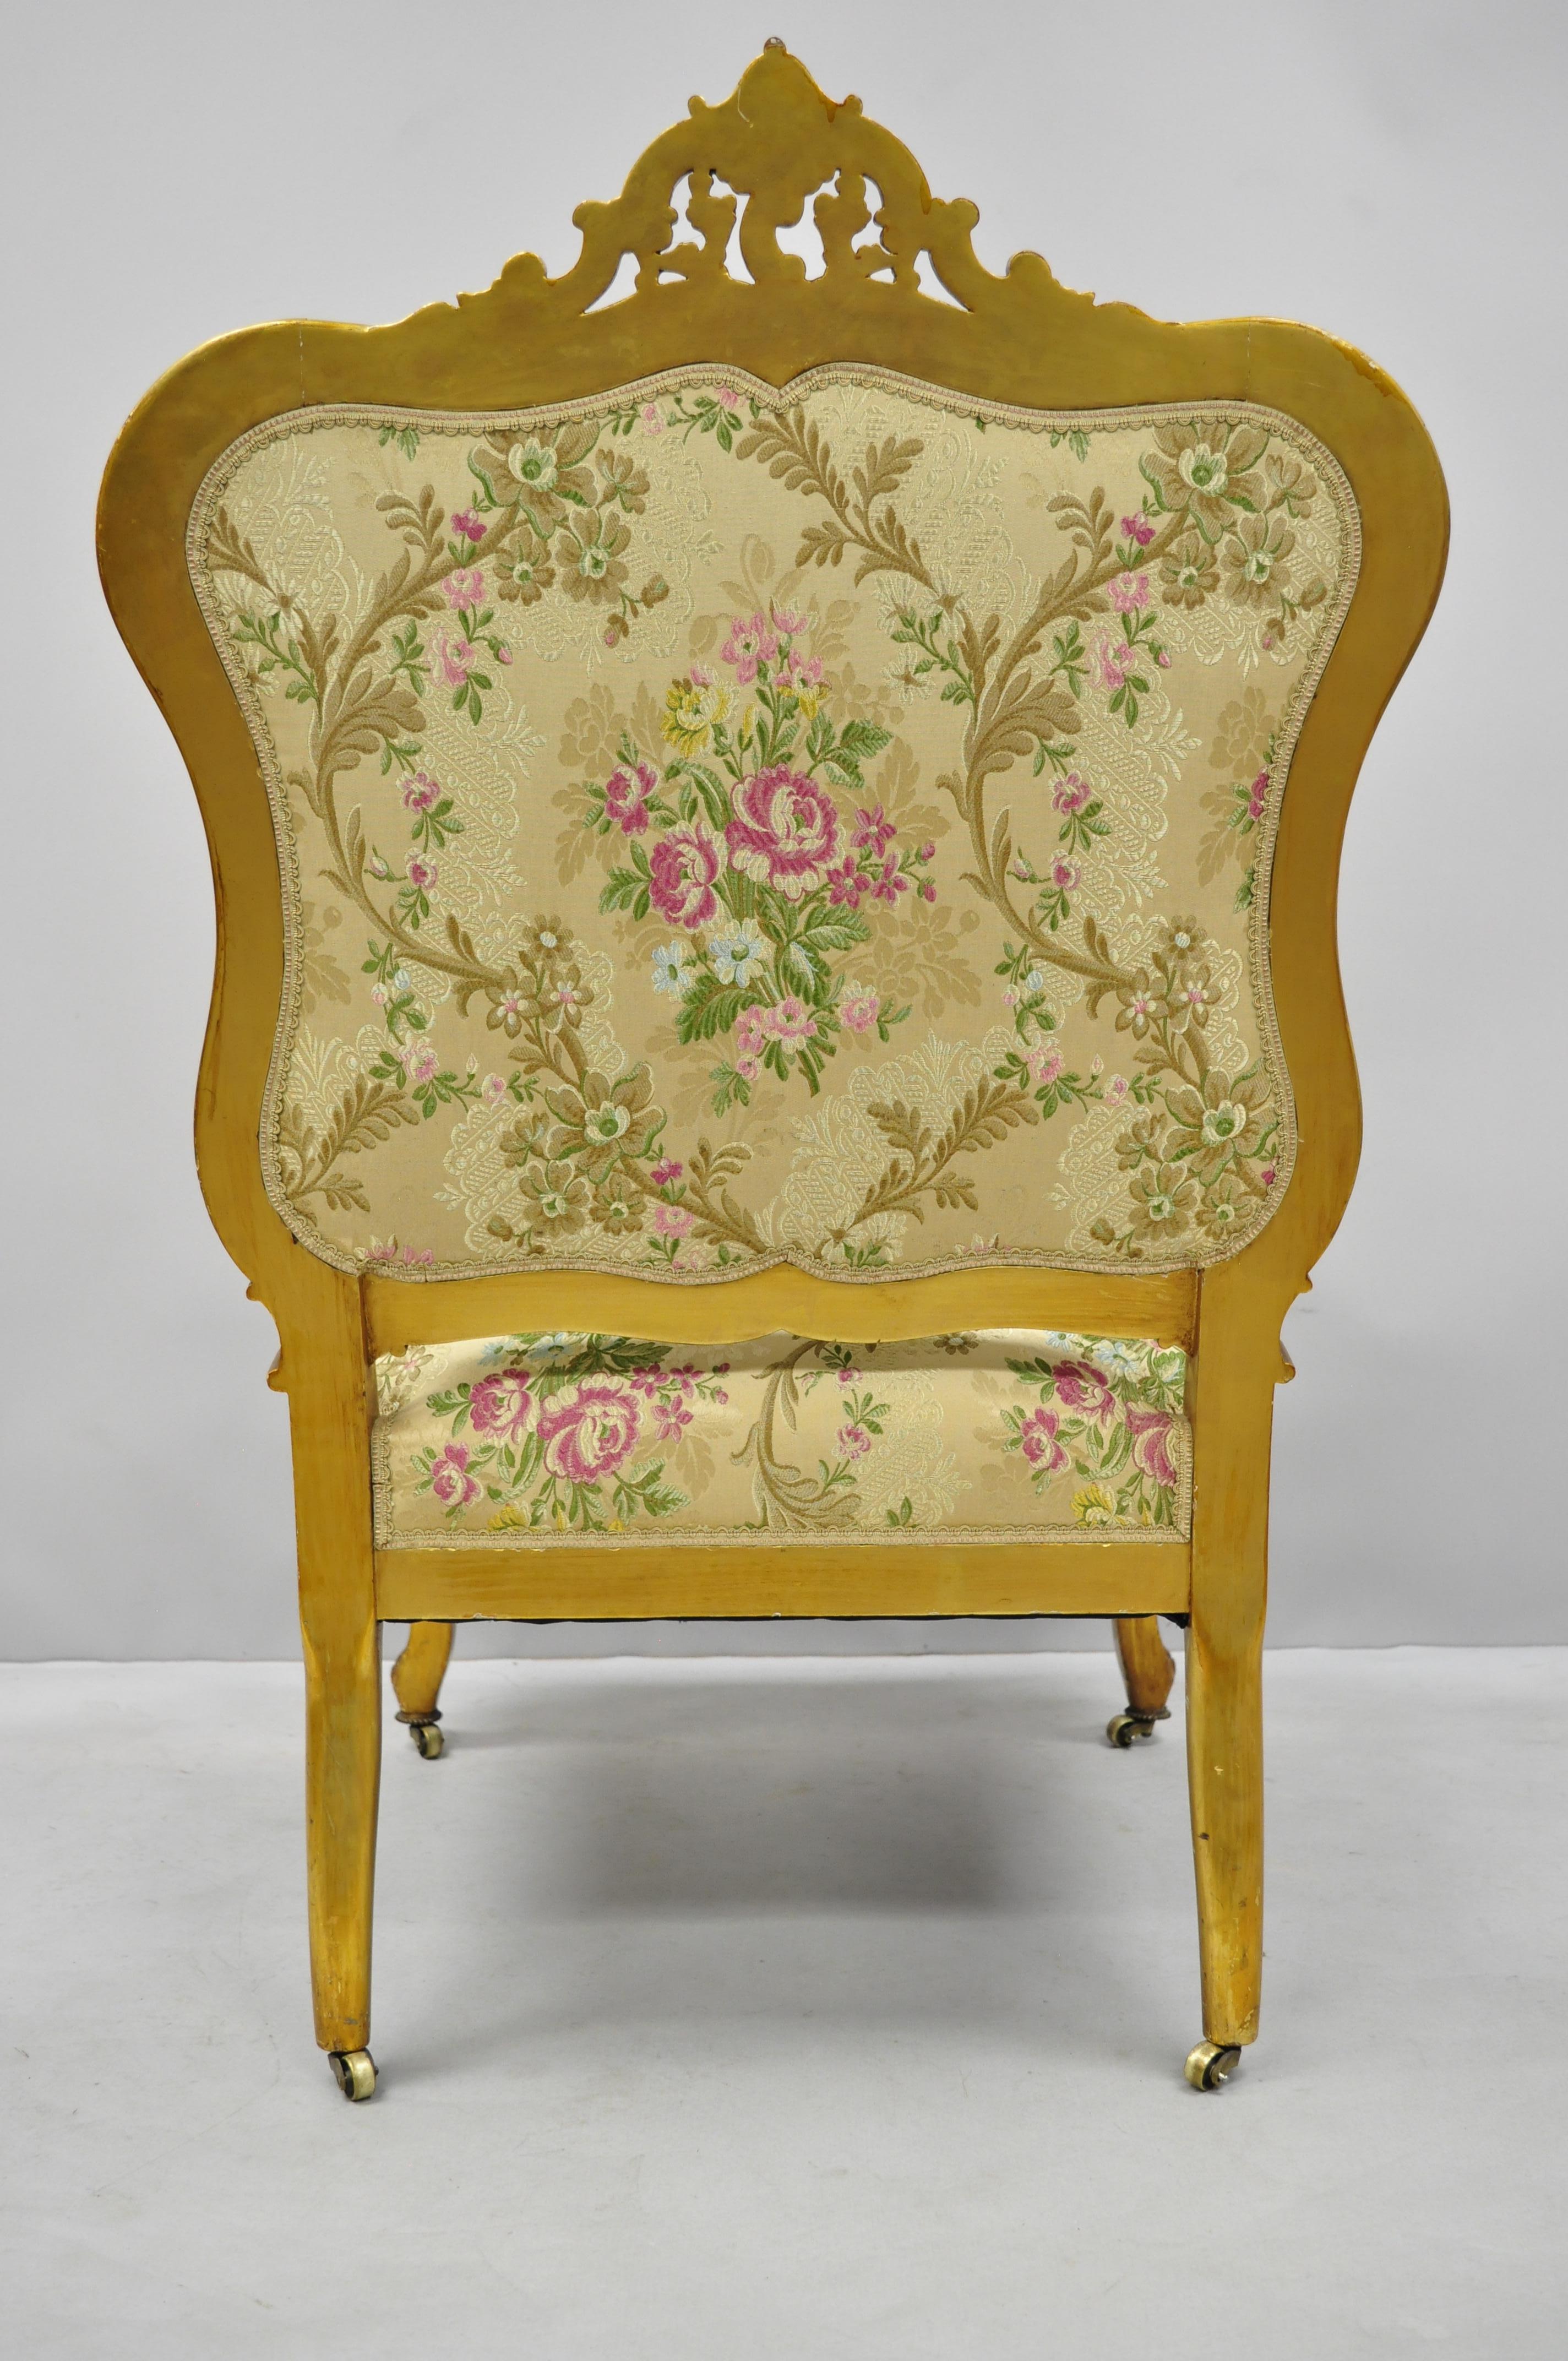 1920s French Louis XV Rococo Style Gold Gilt Parlor Chair Armchair 2